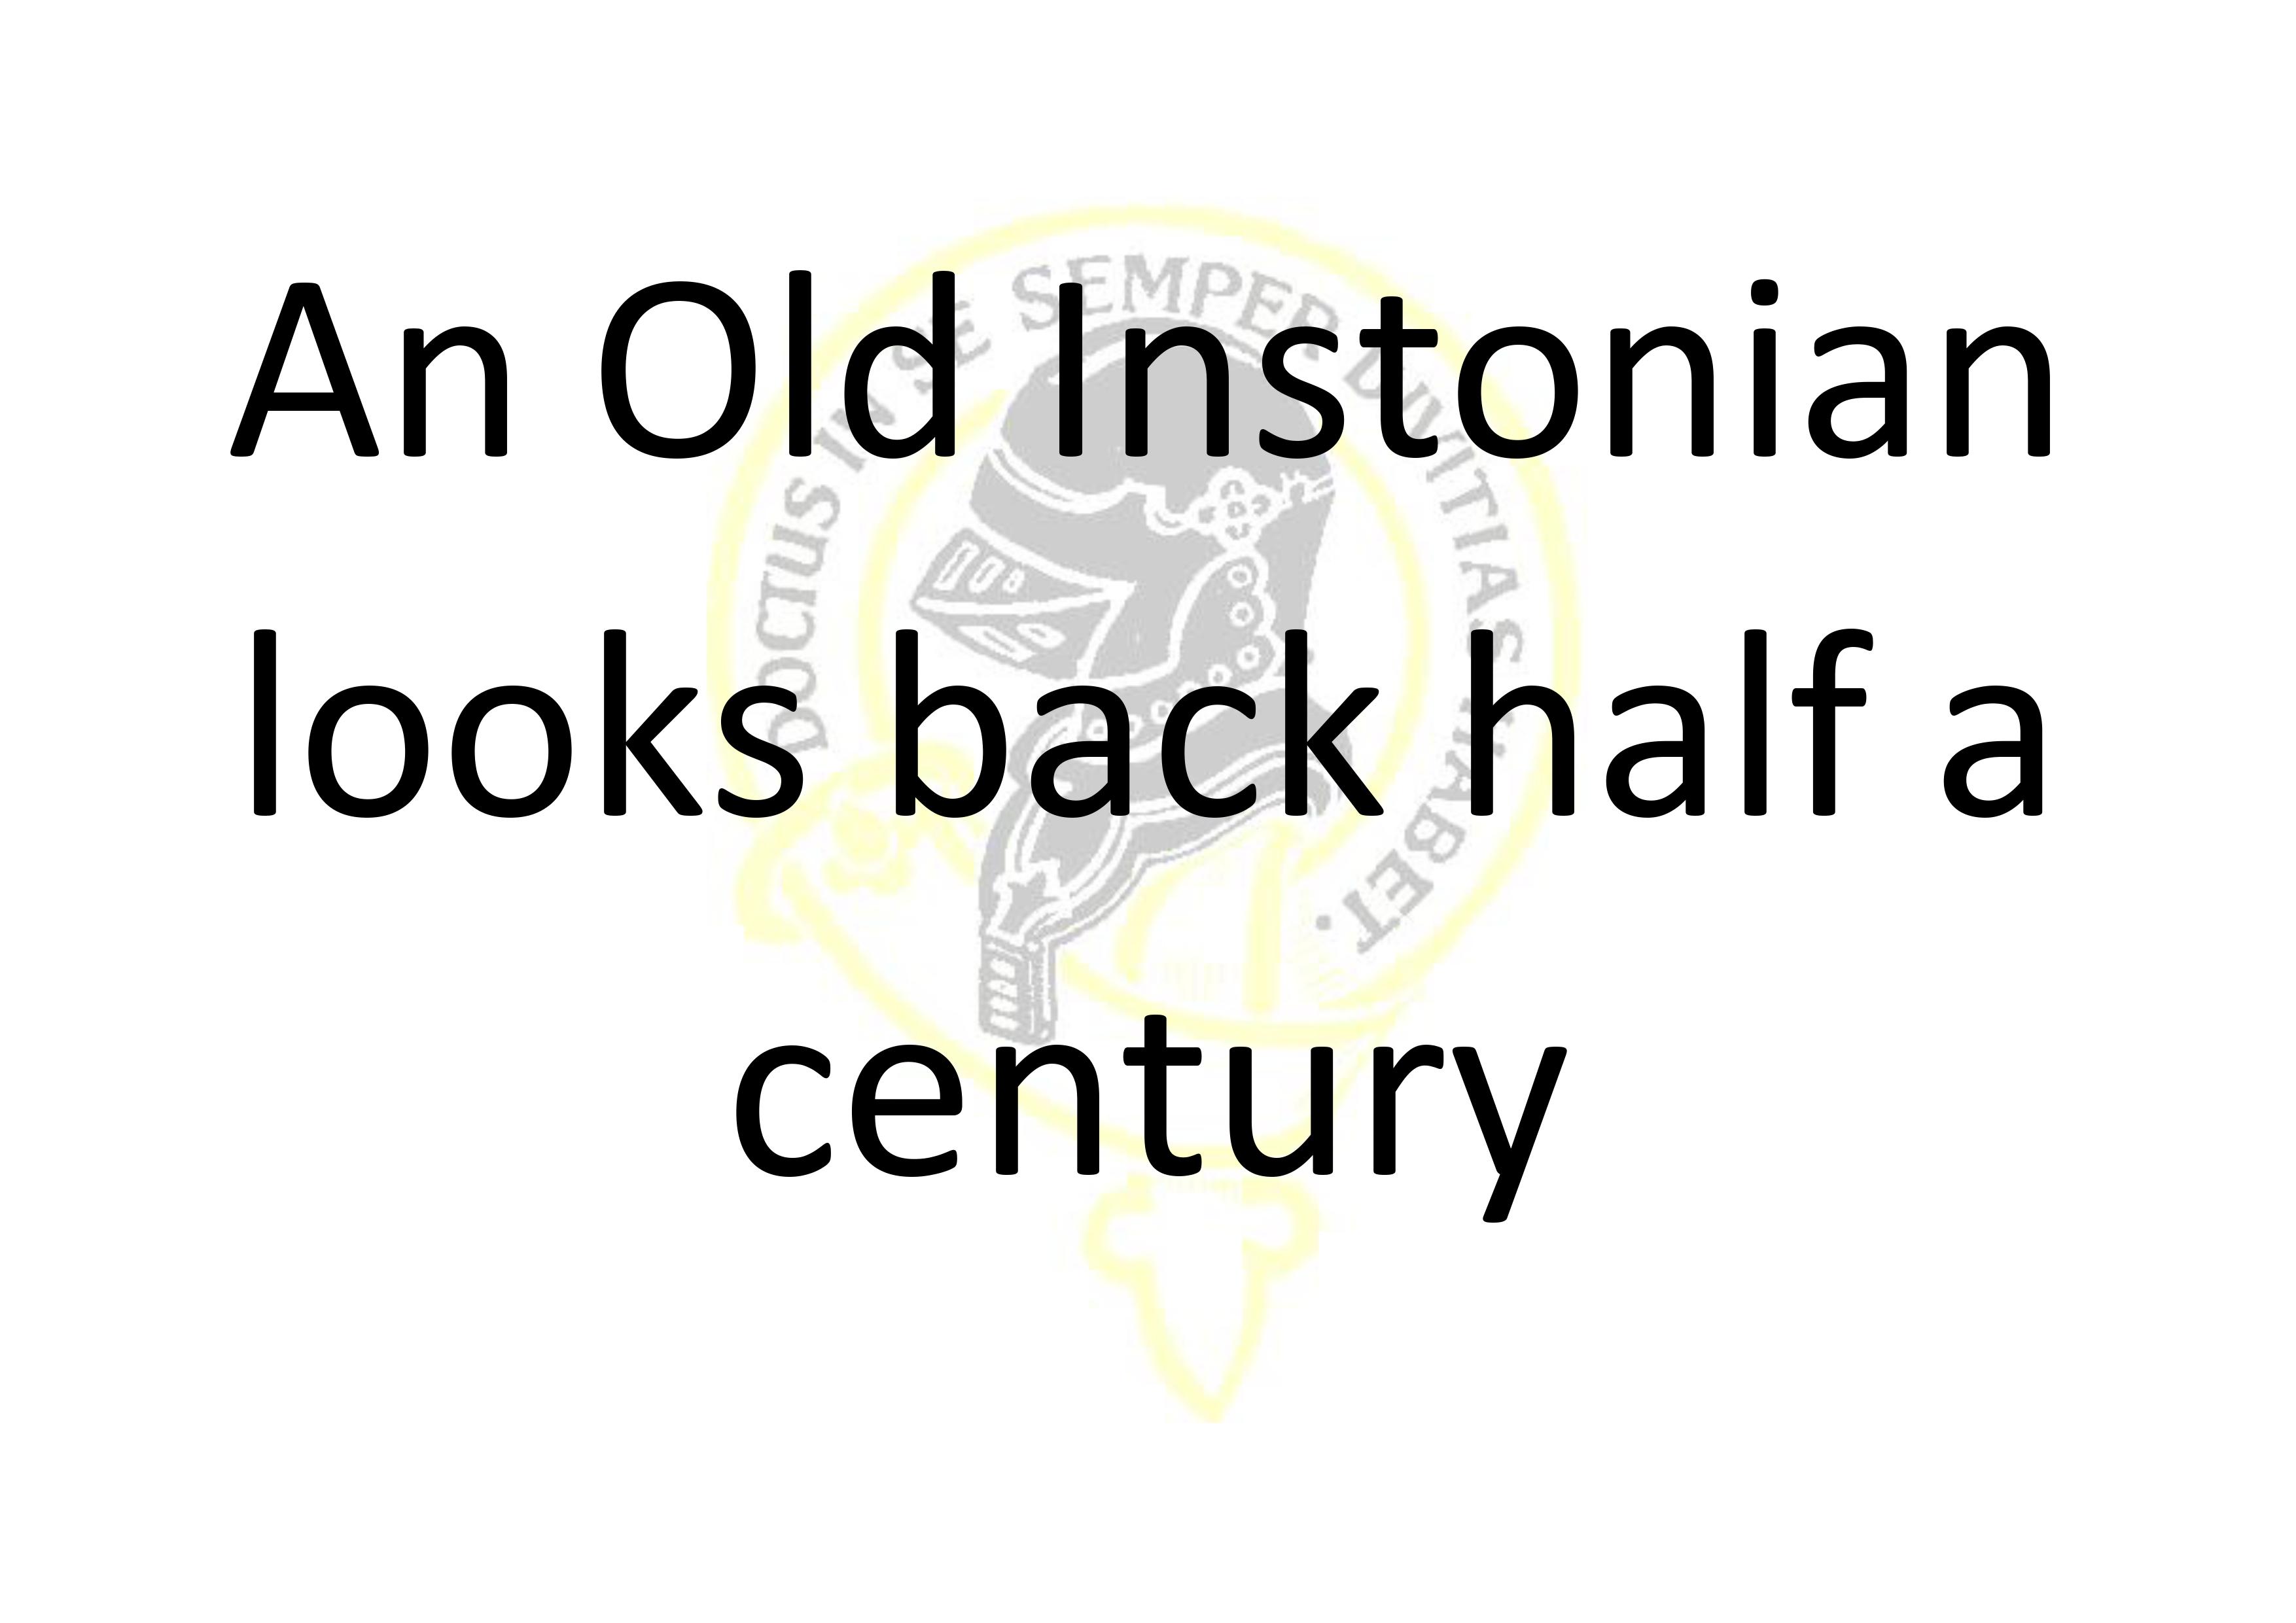 An Old Instonian looks back half a century